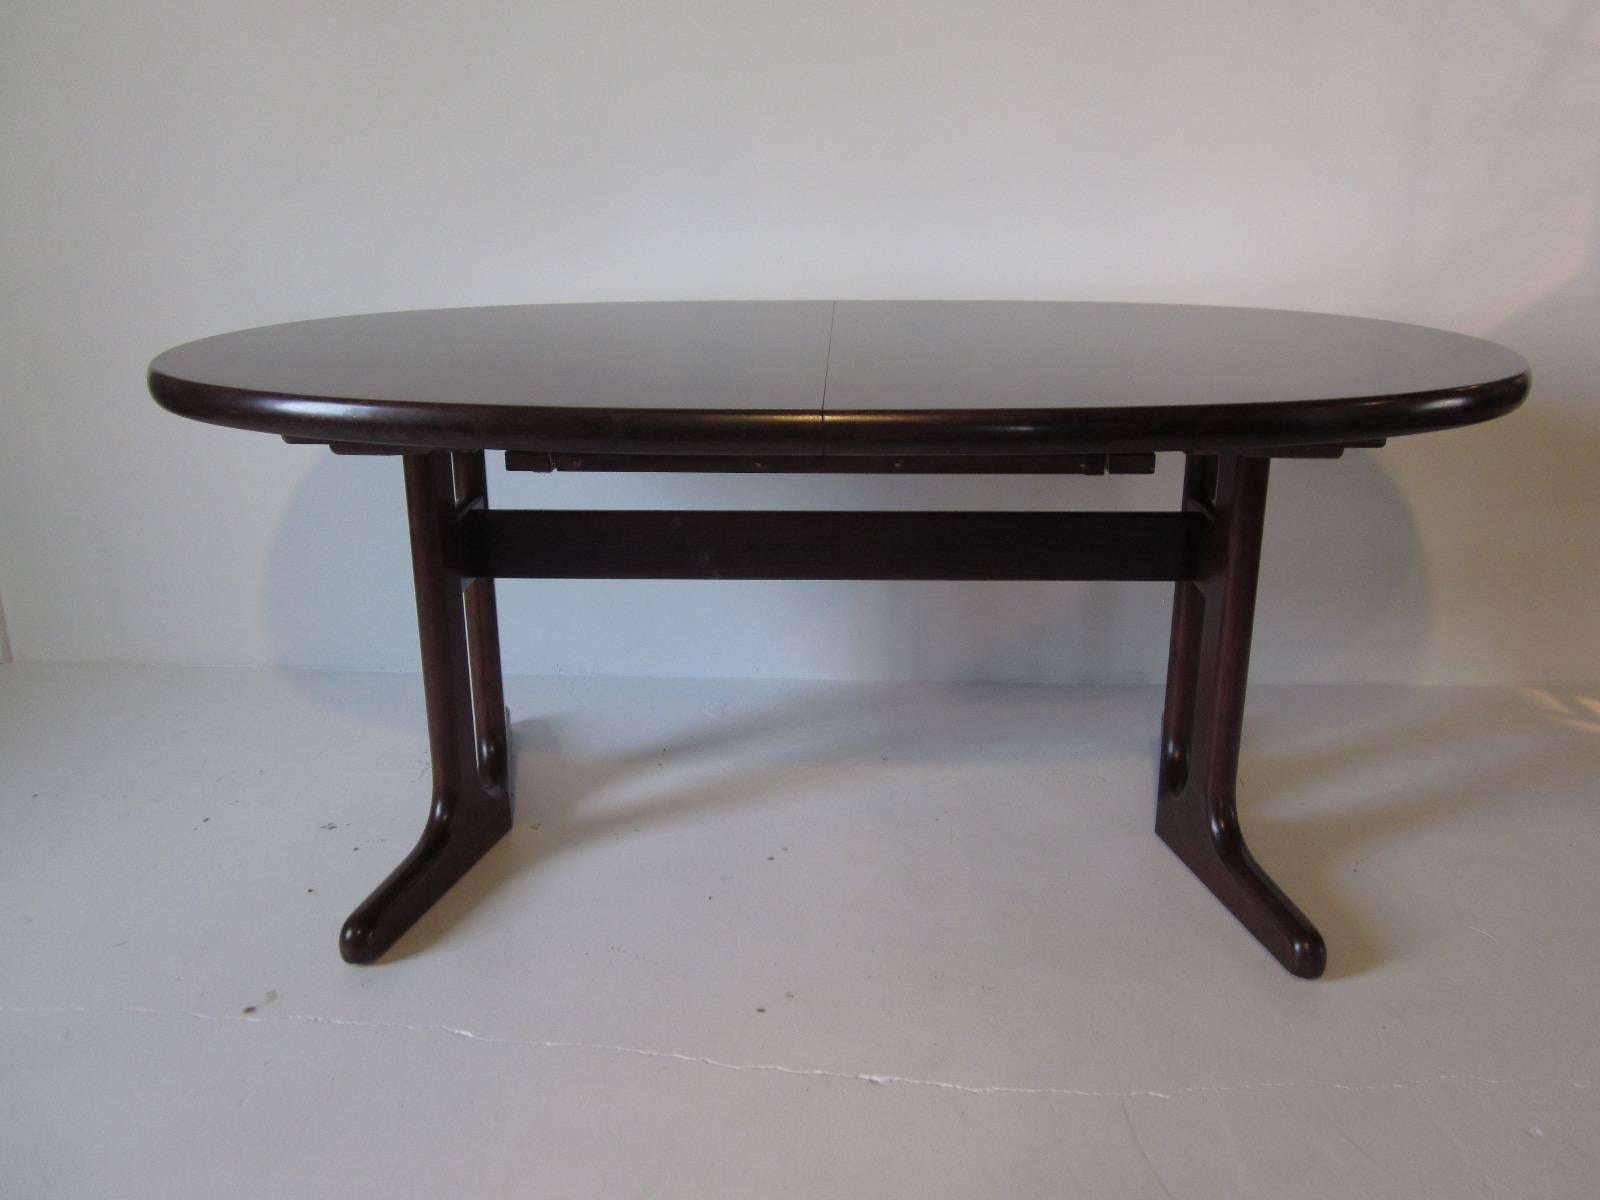 A well made dining table with rolled edge and hidden pop up and fold out 29.50 